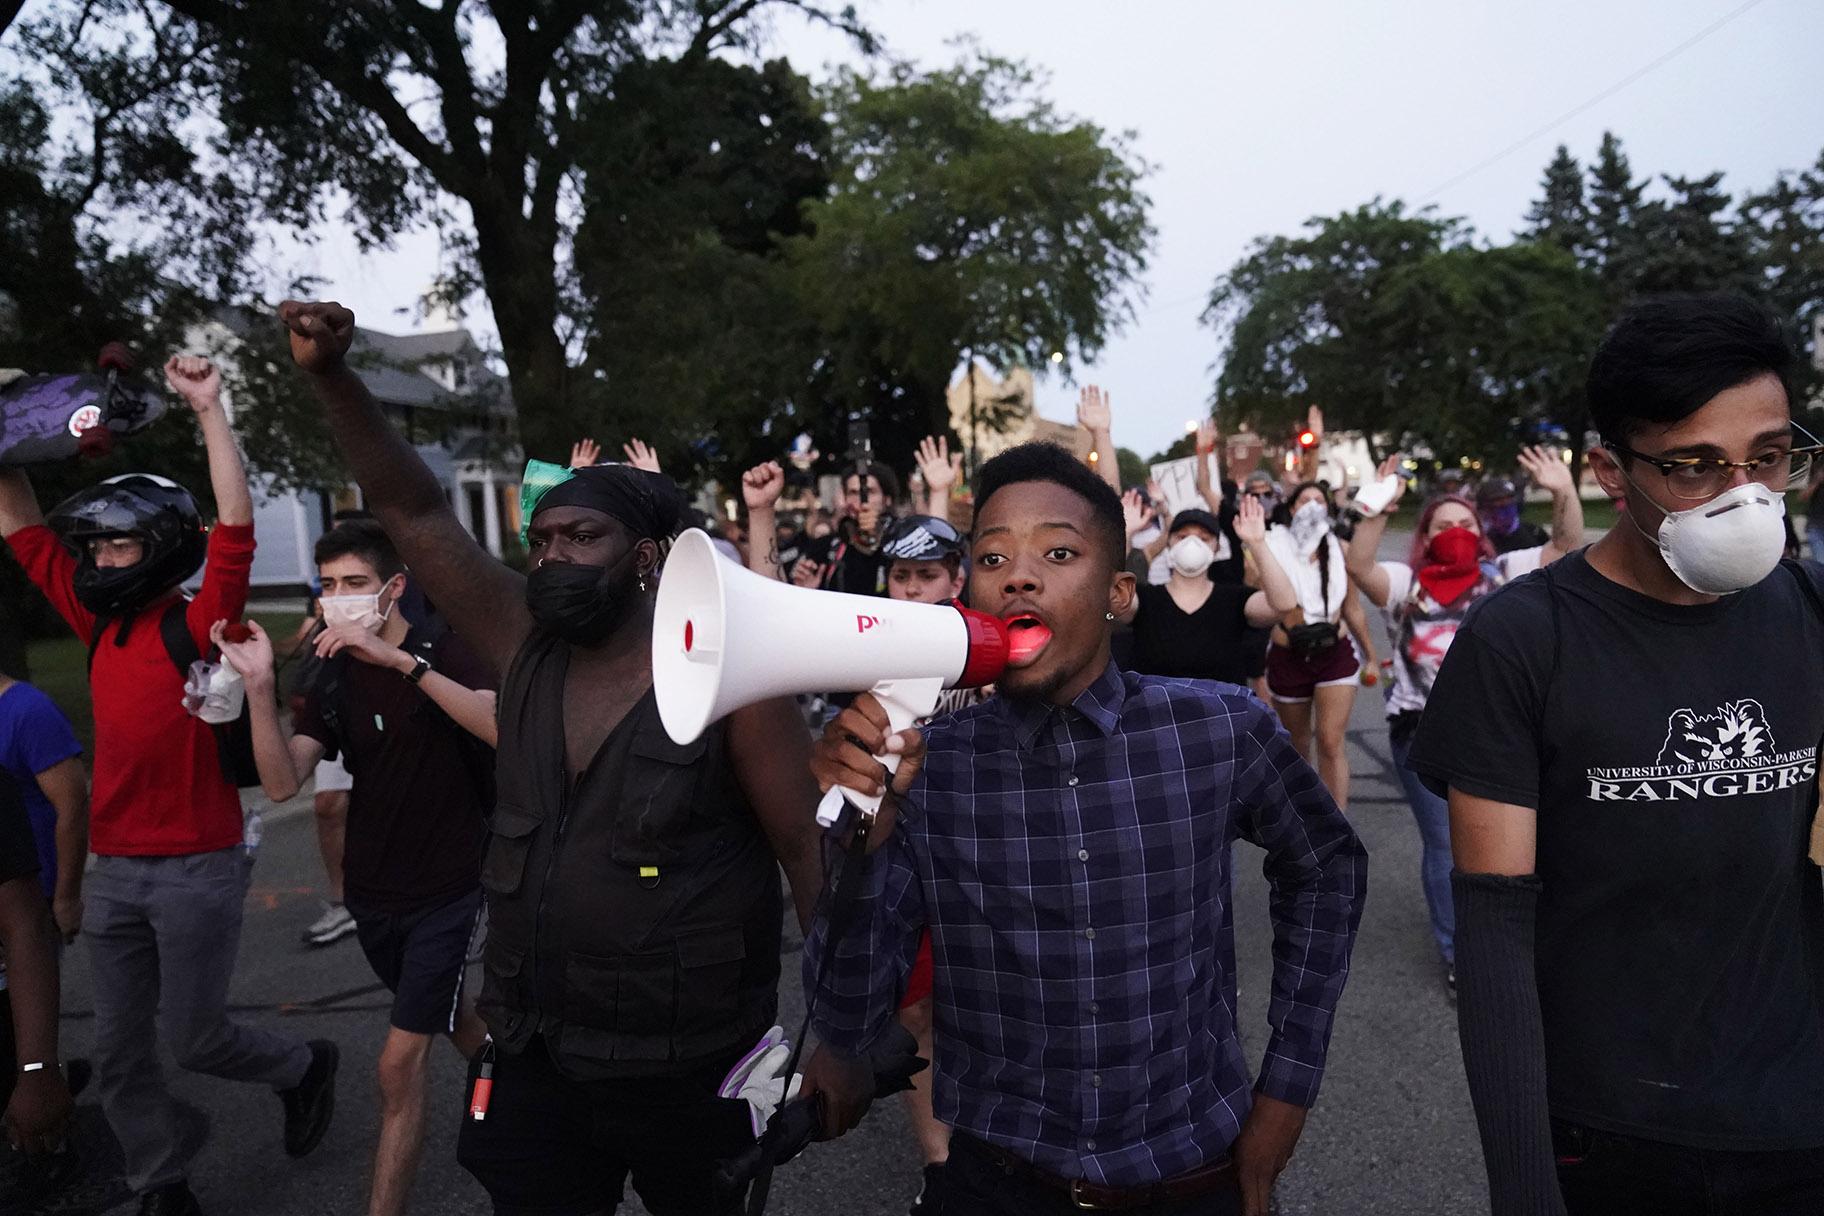 Protesters march against the Sunday police shooting of Jacob Blake in Kenosha, Wis., Wednesday, Aug. 26, 2020. (AP Photo / David Goldman)